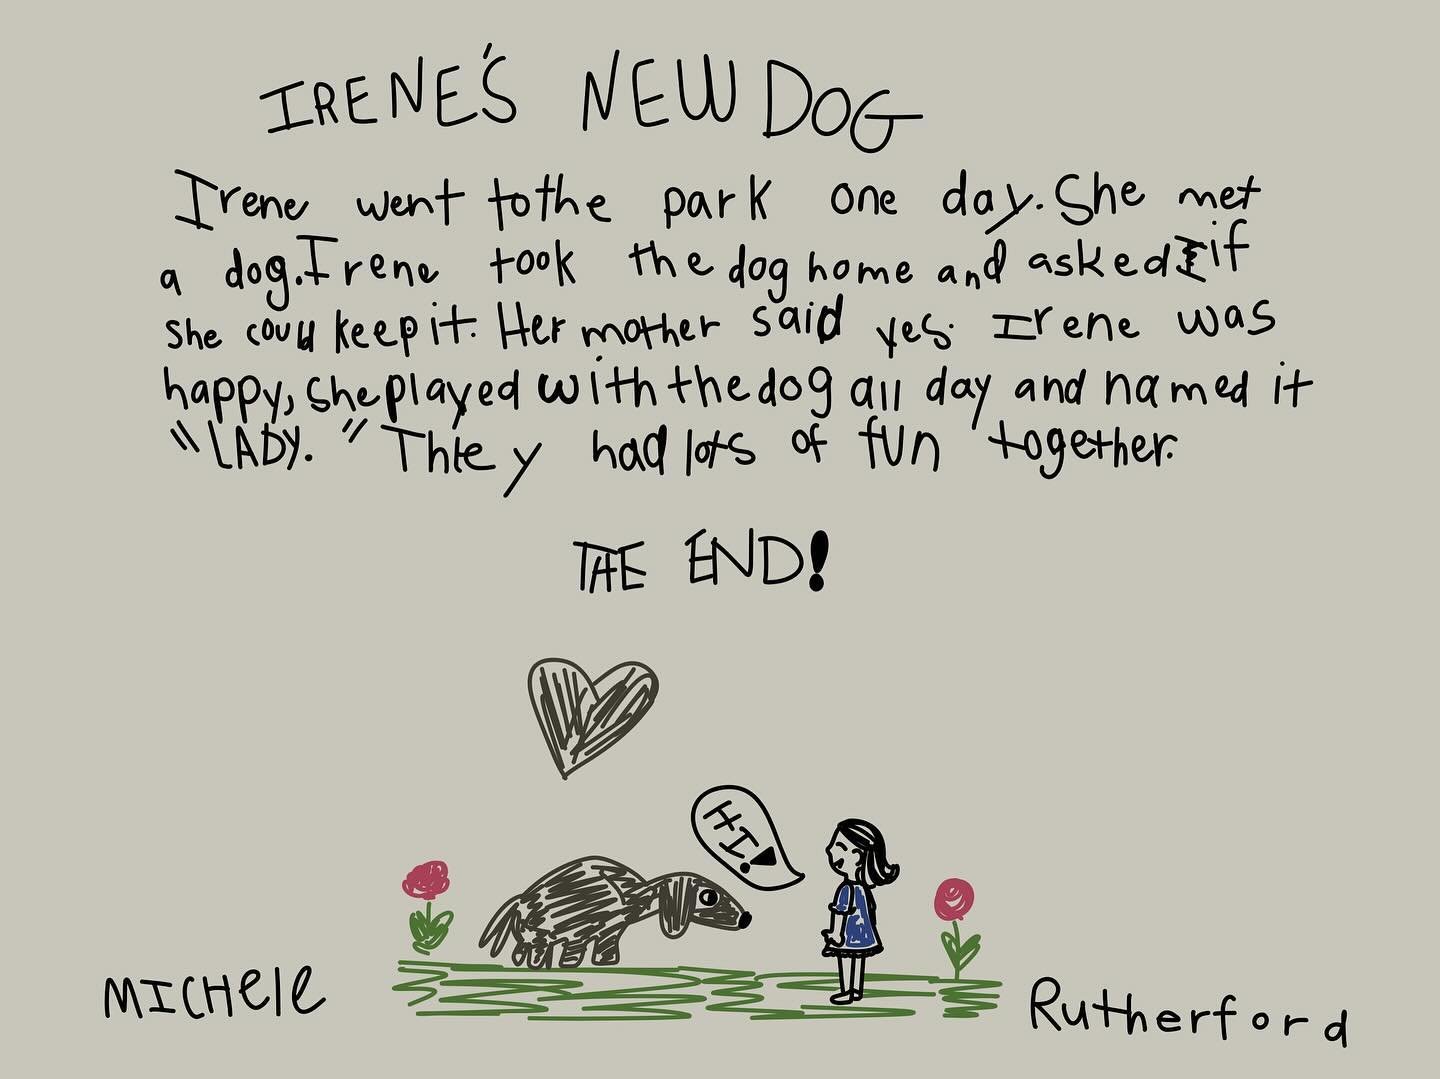 Irene&rsquo;s New Dog. When I was probably 6-years-old, I wrote a story about my mom and our dog, Lady. My mom loved it and had it hanging in her sewing room with pride. And then when I was an ornery teenager, we had an argument. I took the drawing a